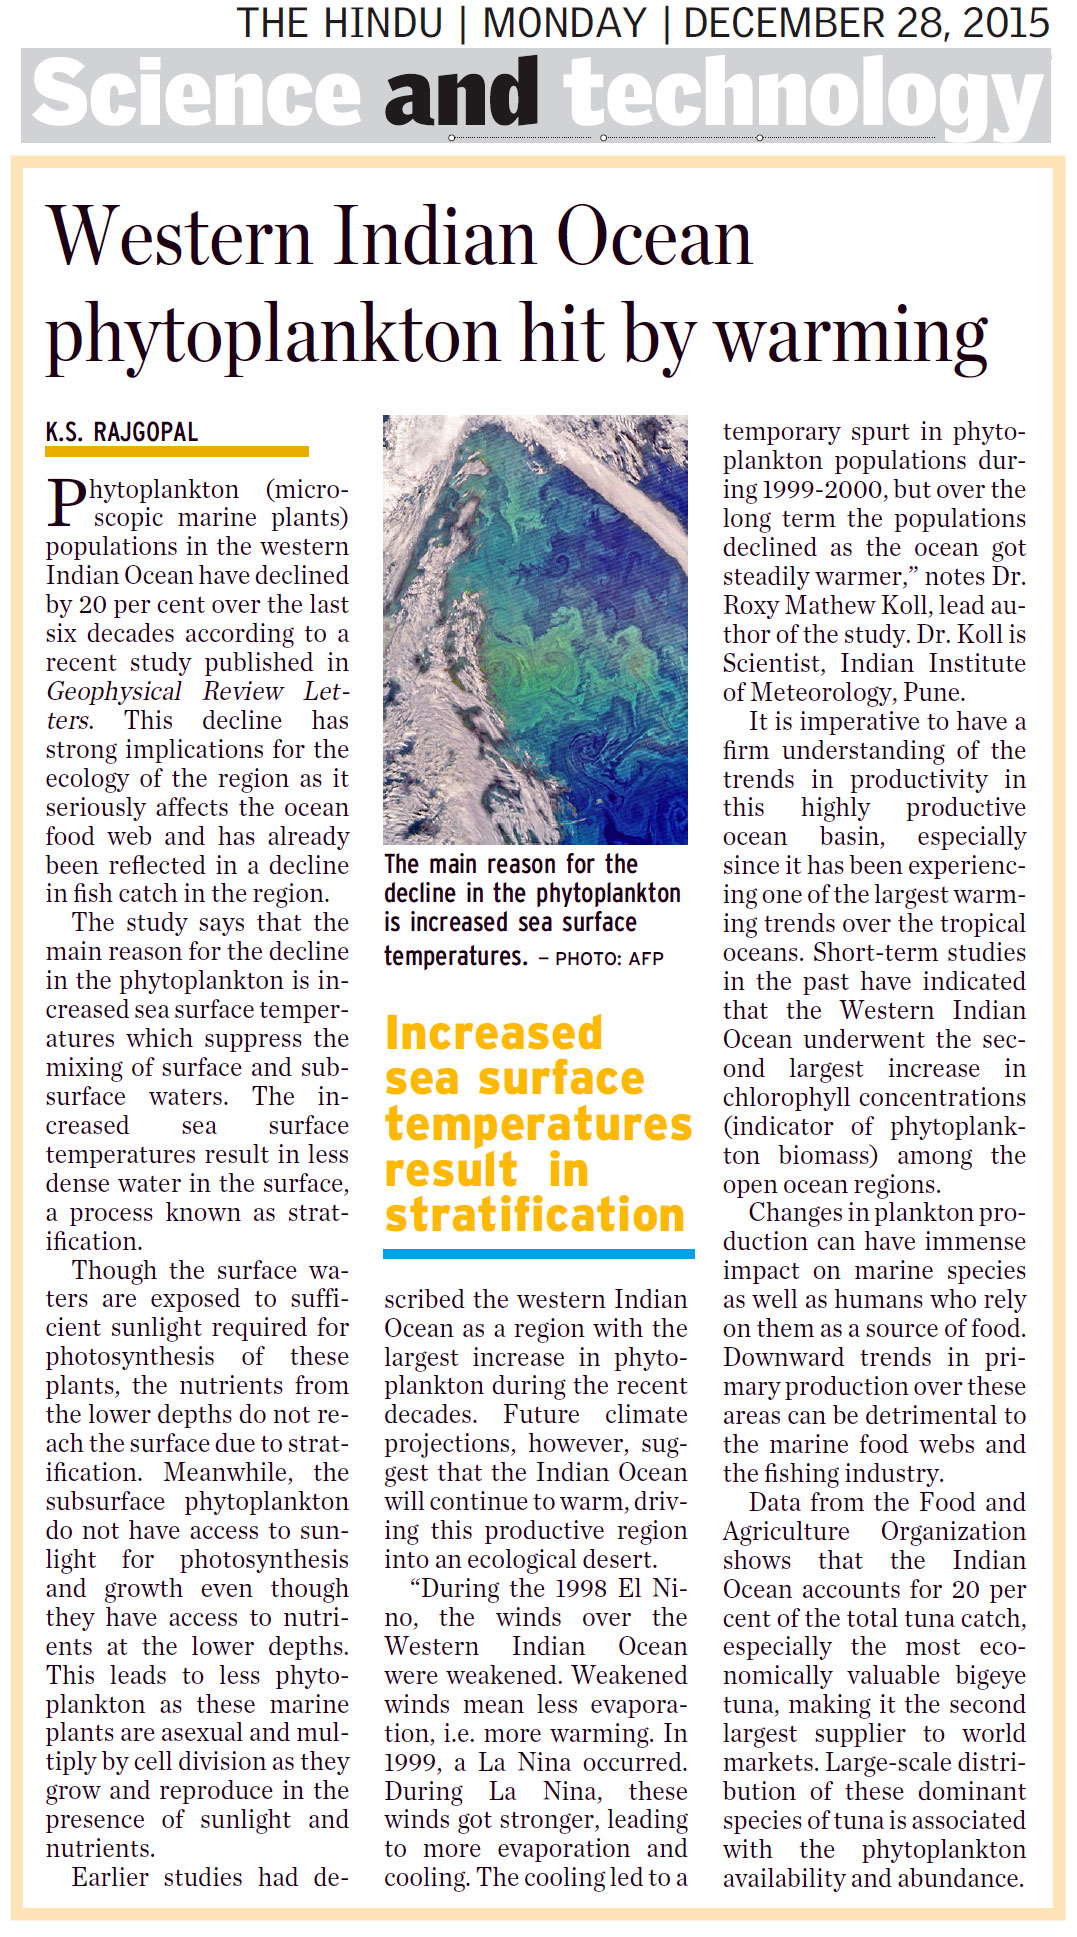 The Hindu Science & Technology—Western Indian Ocean phytoplankton hit by warming